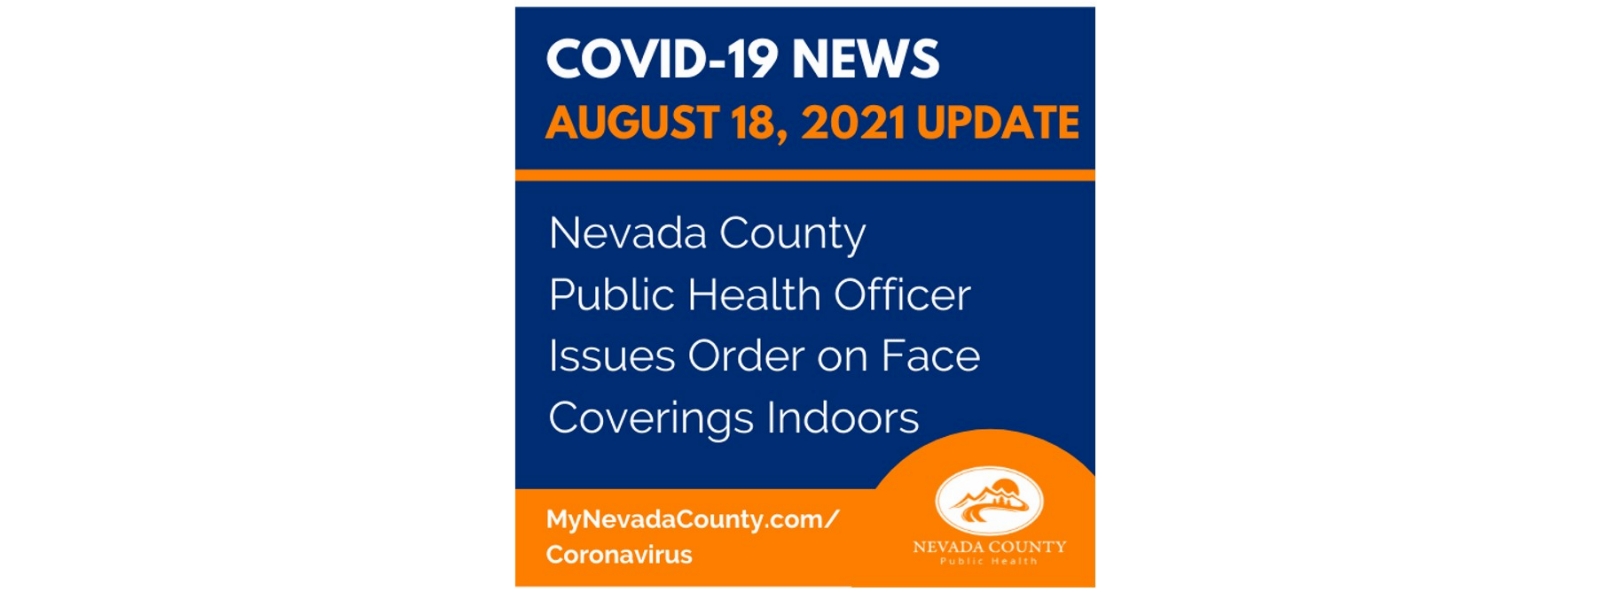 Nevada County Issues Order on Face Coverings Indoors